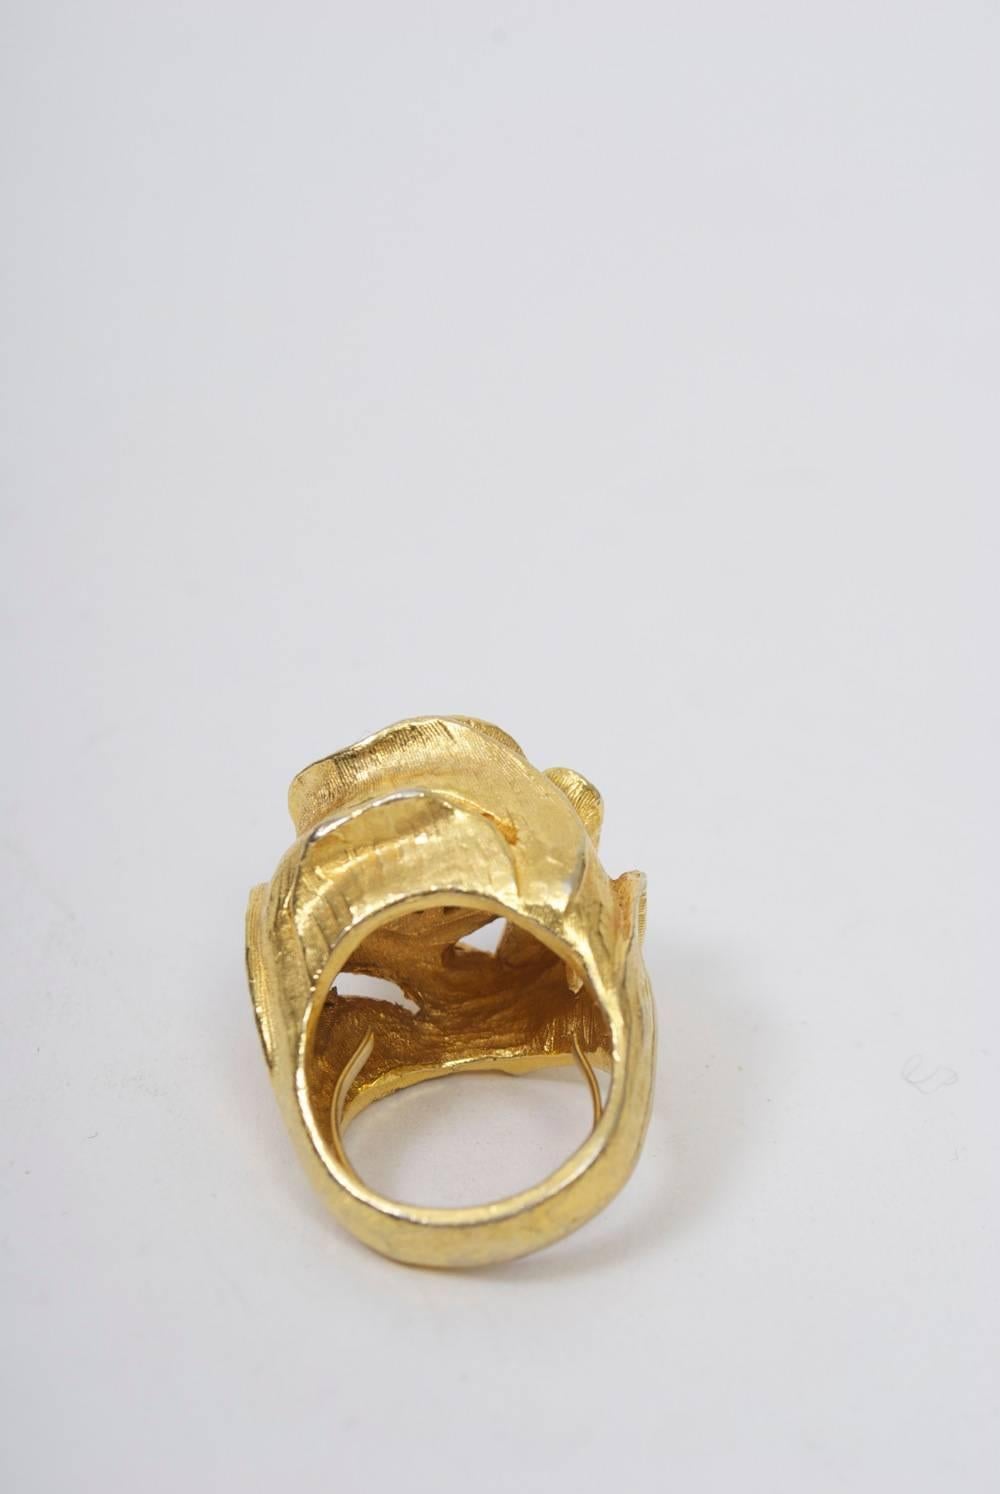 Heavy gold metal ring of floral shape centering a round turquoise stone. Gold metal is nicely textured and has an interior adjustable finger hold. Known for her chunky jewelry, Rader was active mostly in the 1960s and '70s; her production was